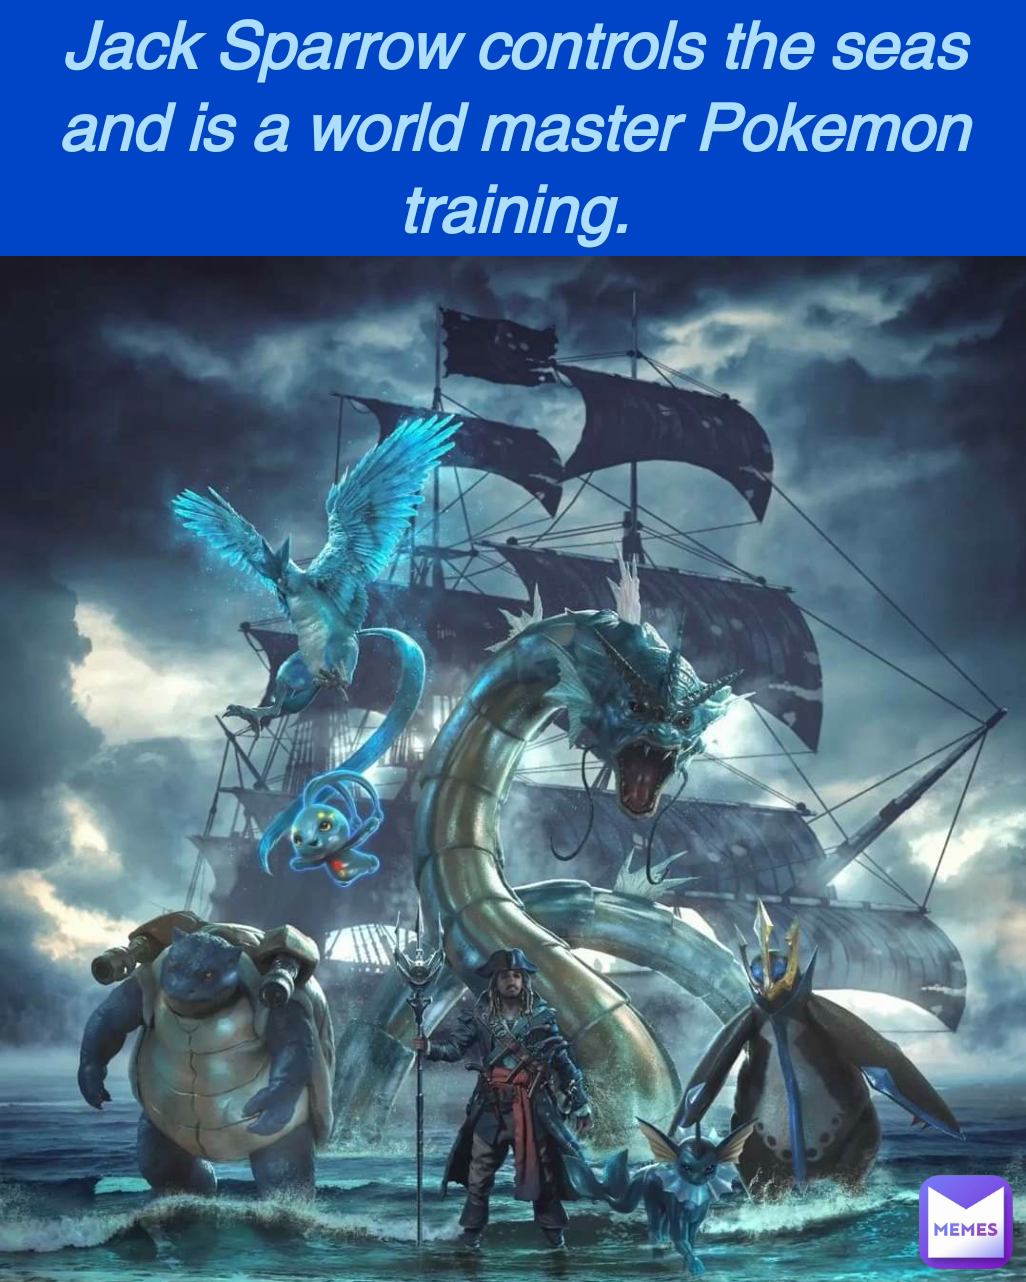 Jack Sparrow controls the seas and is a world master Pokemon training.